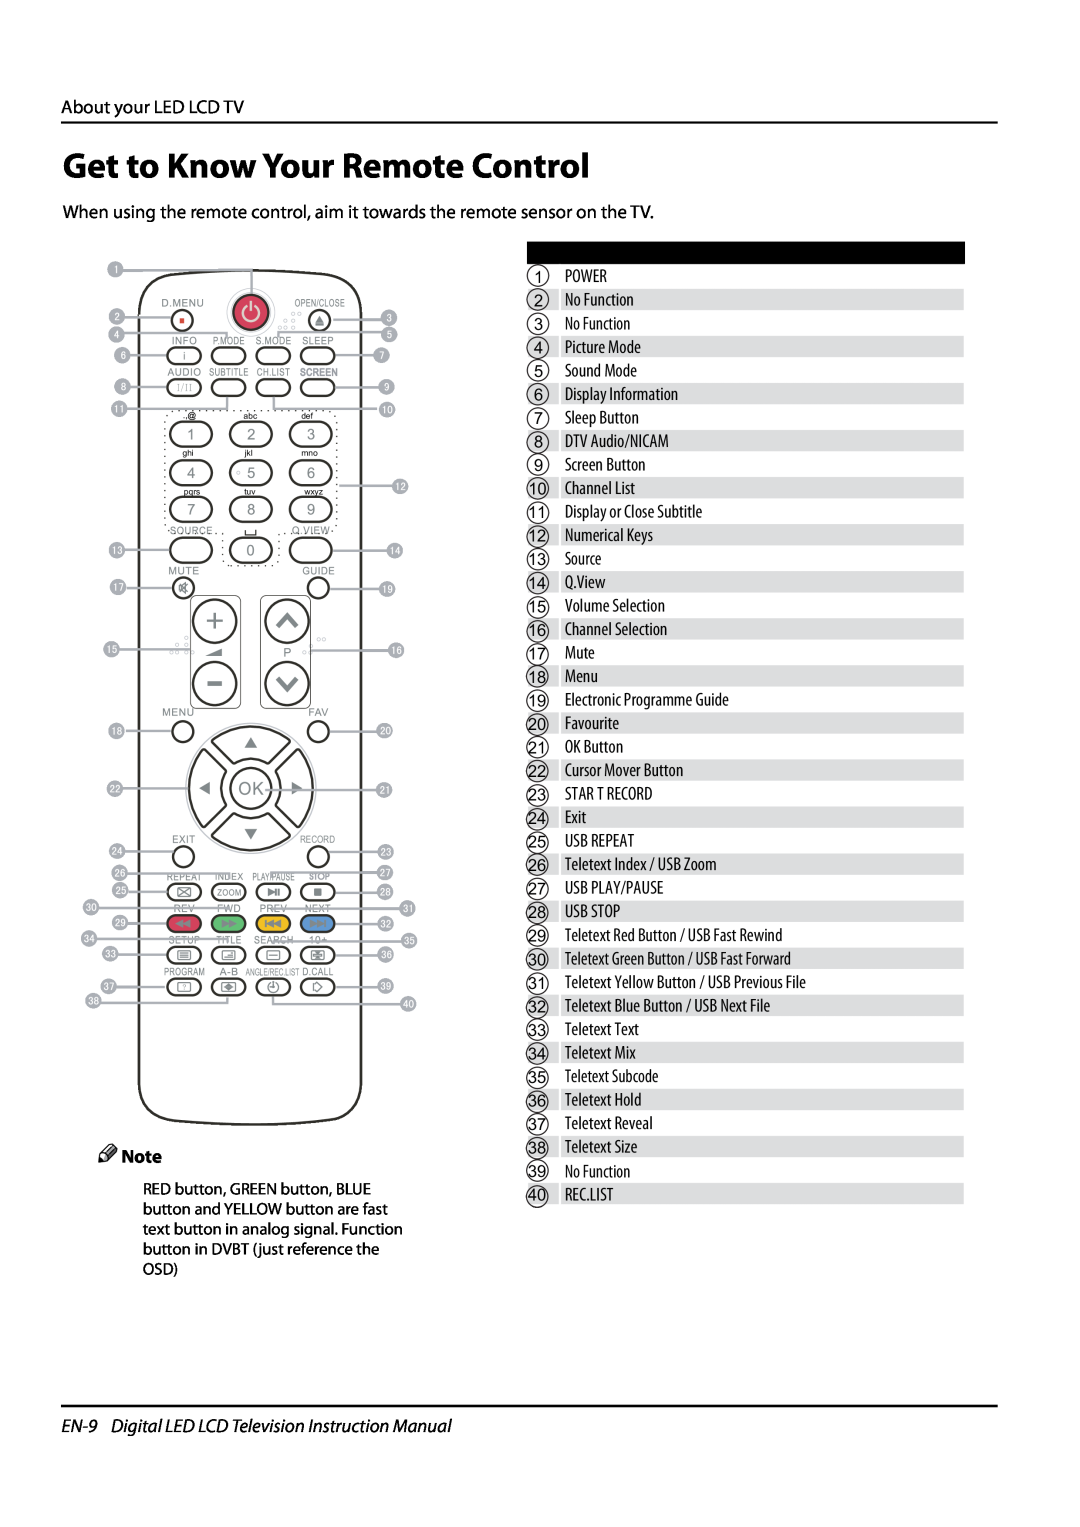 Haier LET32T1000HF, LET42T1000HF Get to Know Your Remote Control, EN-9 Digital LED LCD Television Instruction Manual 